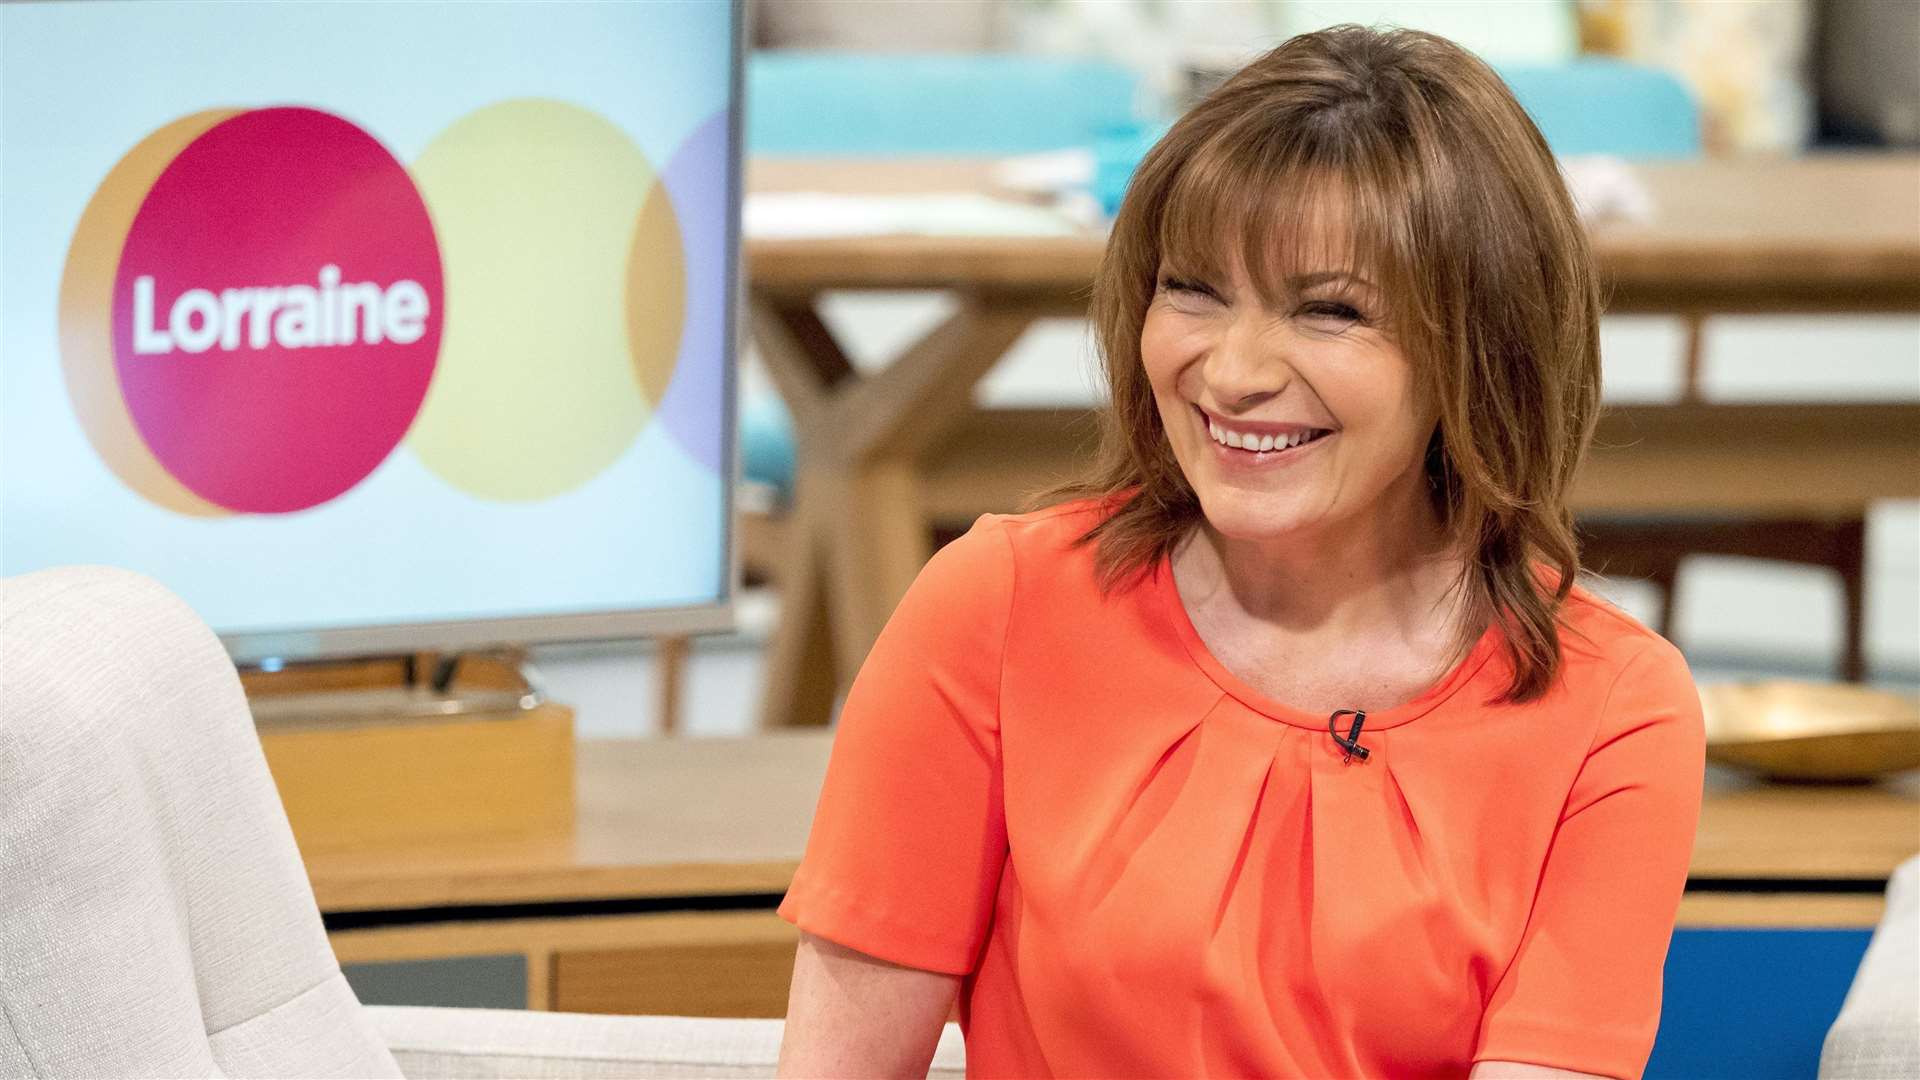 Celebrities such as Lorraine Kelly have been raising more awareness of the menopause